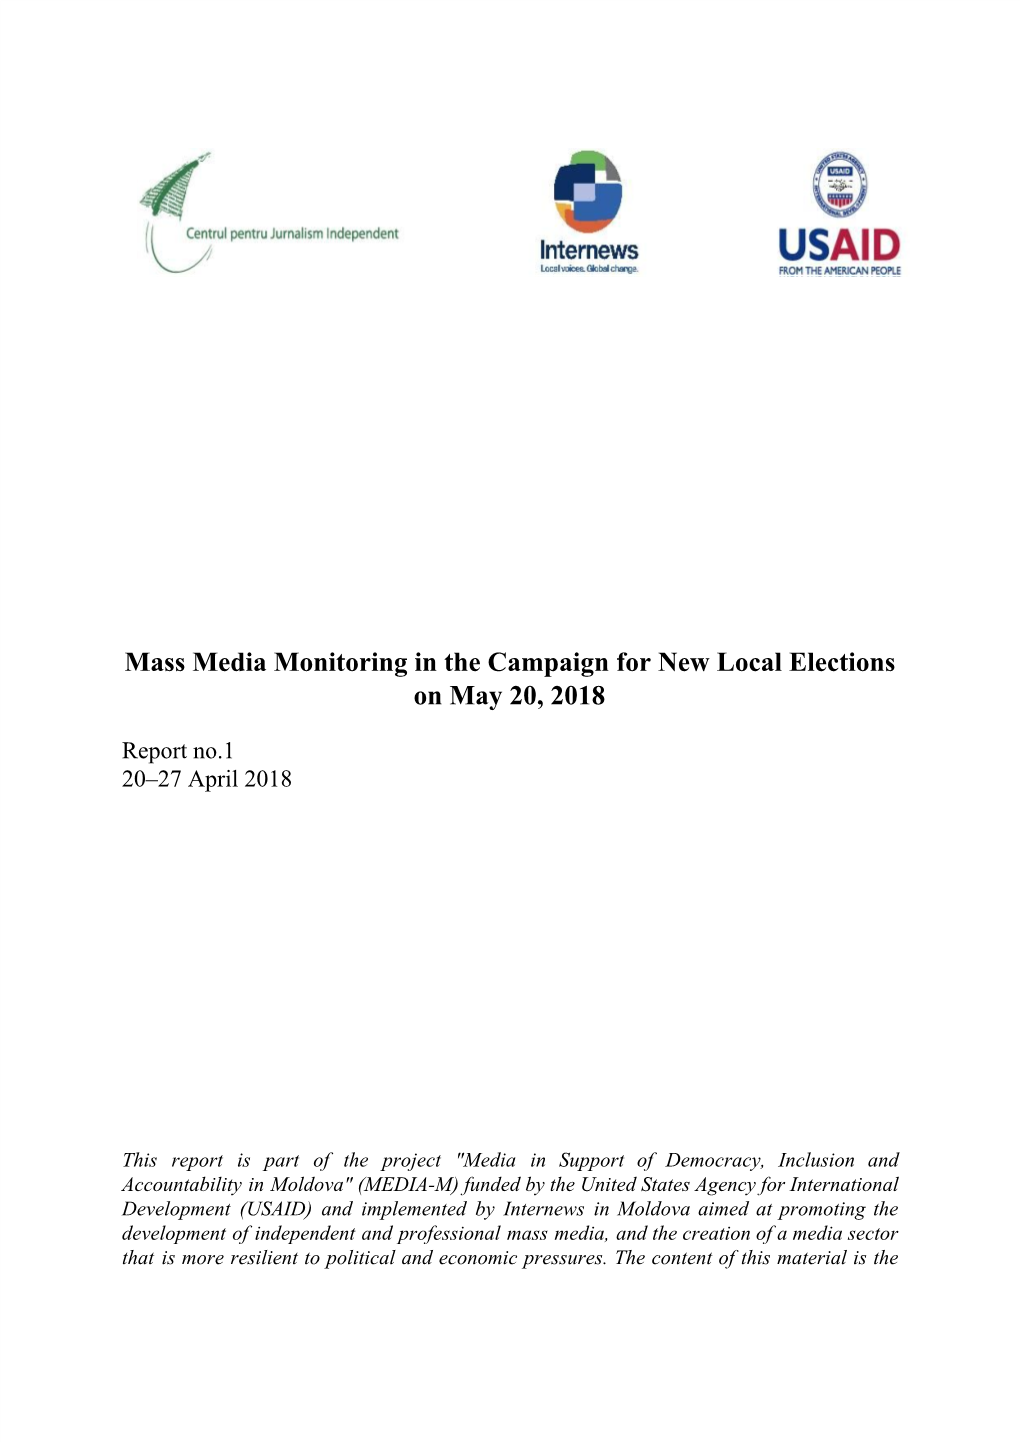 Mass Media Monitoring in the Campaign for New Local Elections on May 20, 2018